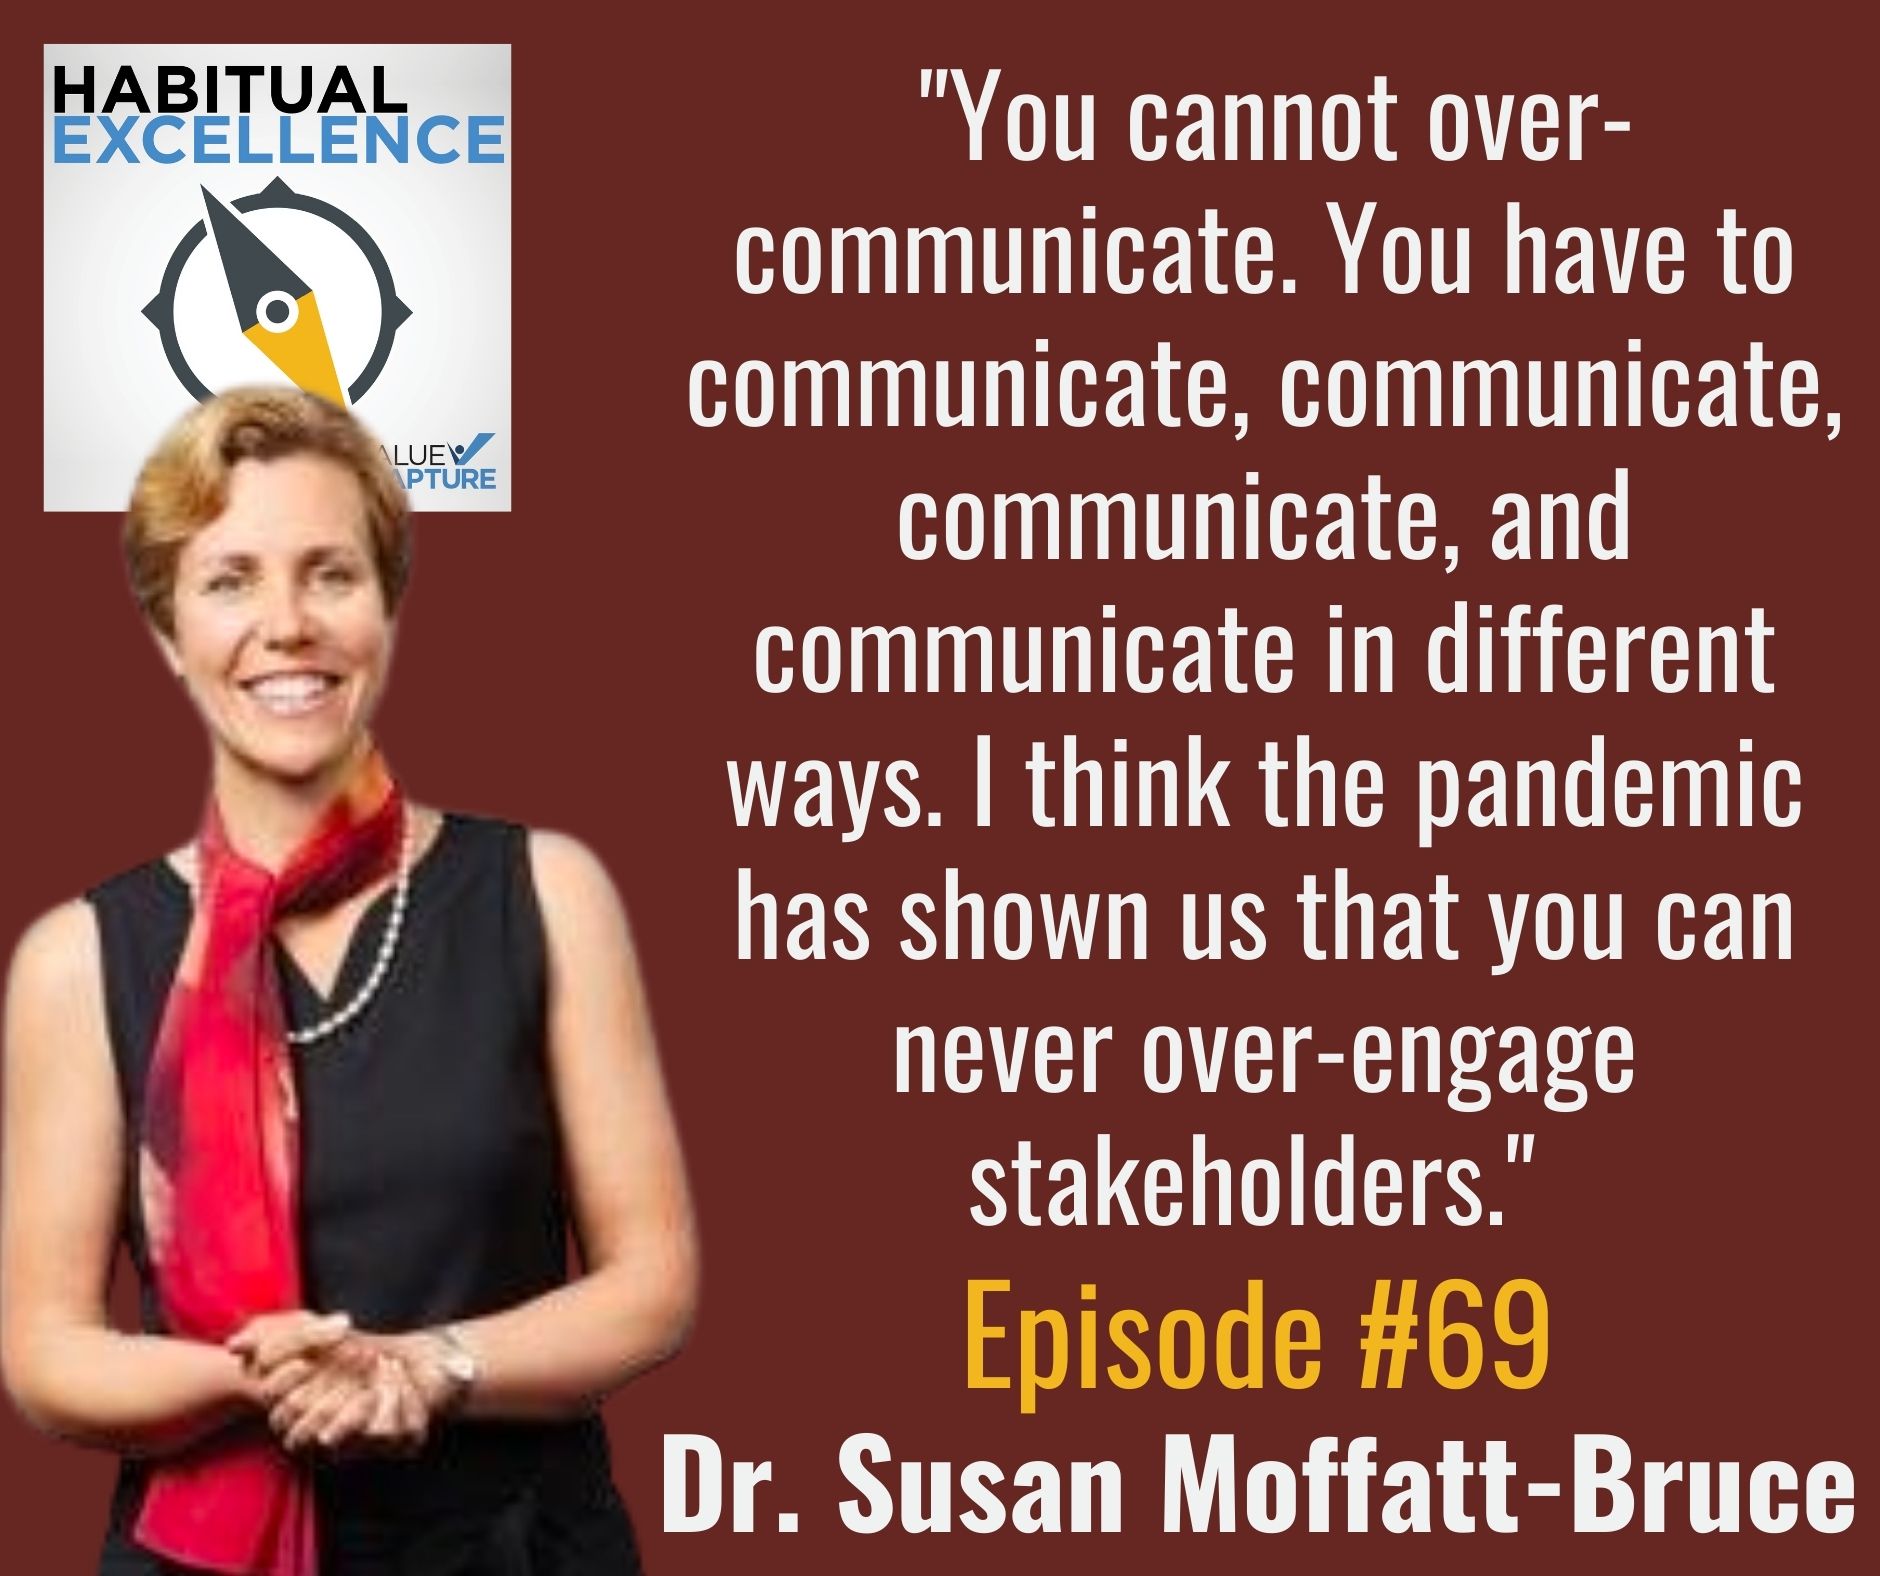  "You cannot over-communicate. You have to communicate, communicate, communicate, and communicate in different ways. I think the pandemic has shown us that you can never over-engage stakeholders." 